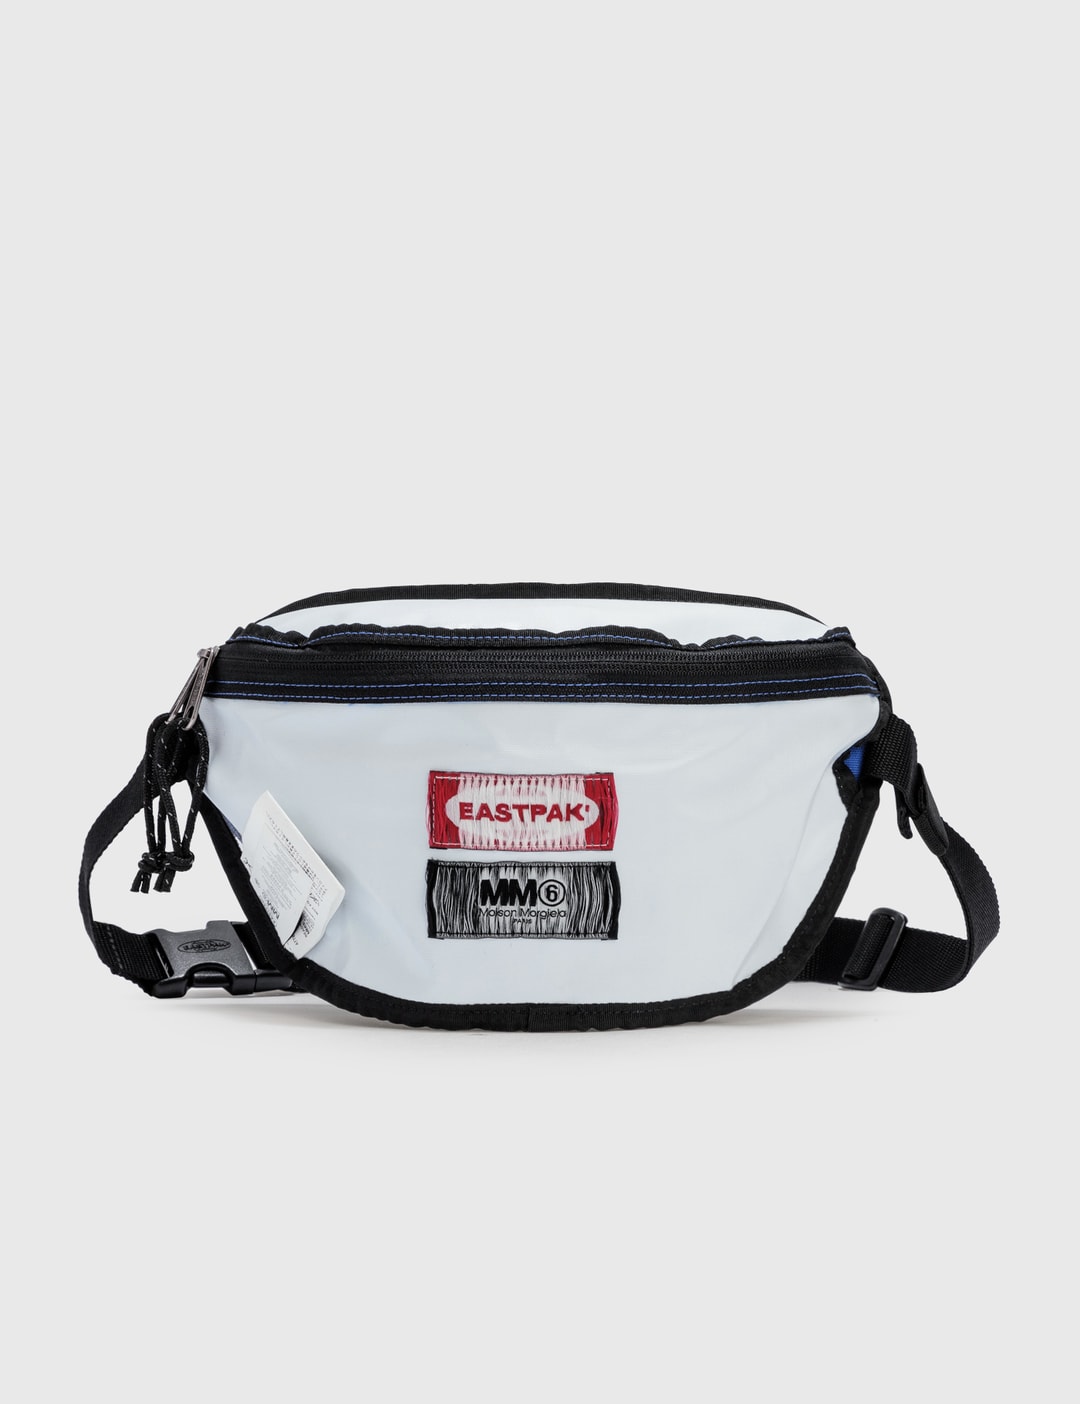 MM6 Maison Margiela - MM6 x Eastpak Reversible Large Bum Bag | HBX - Globally Curated Fashion and Lifestyle Hypebeast